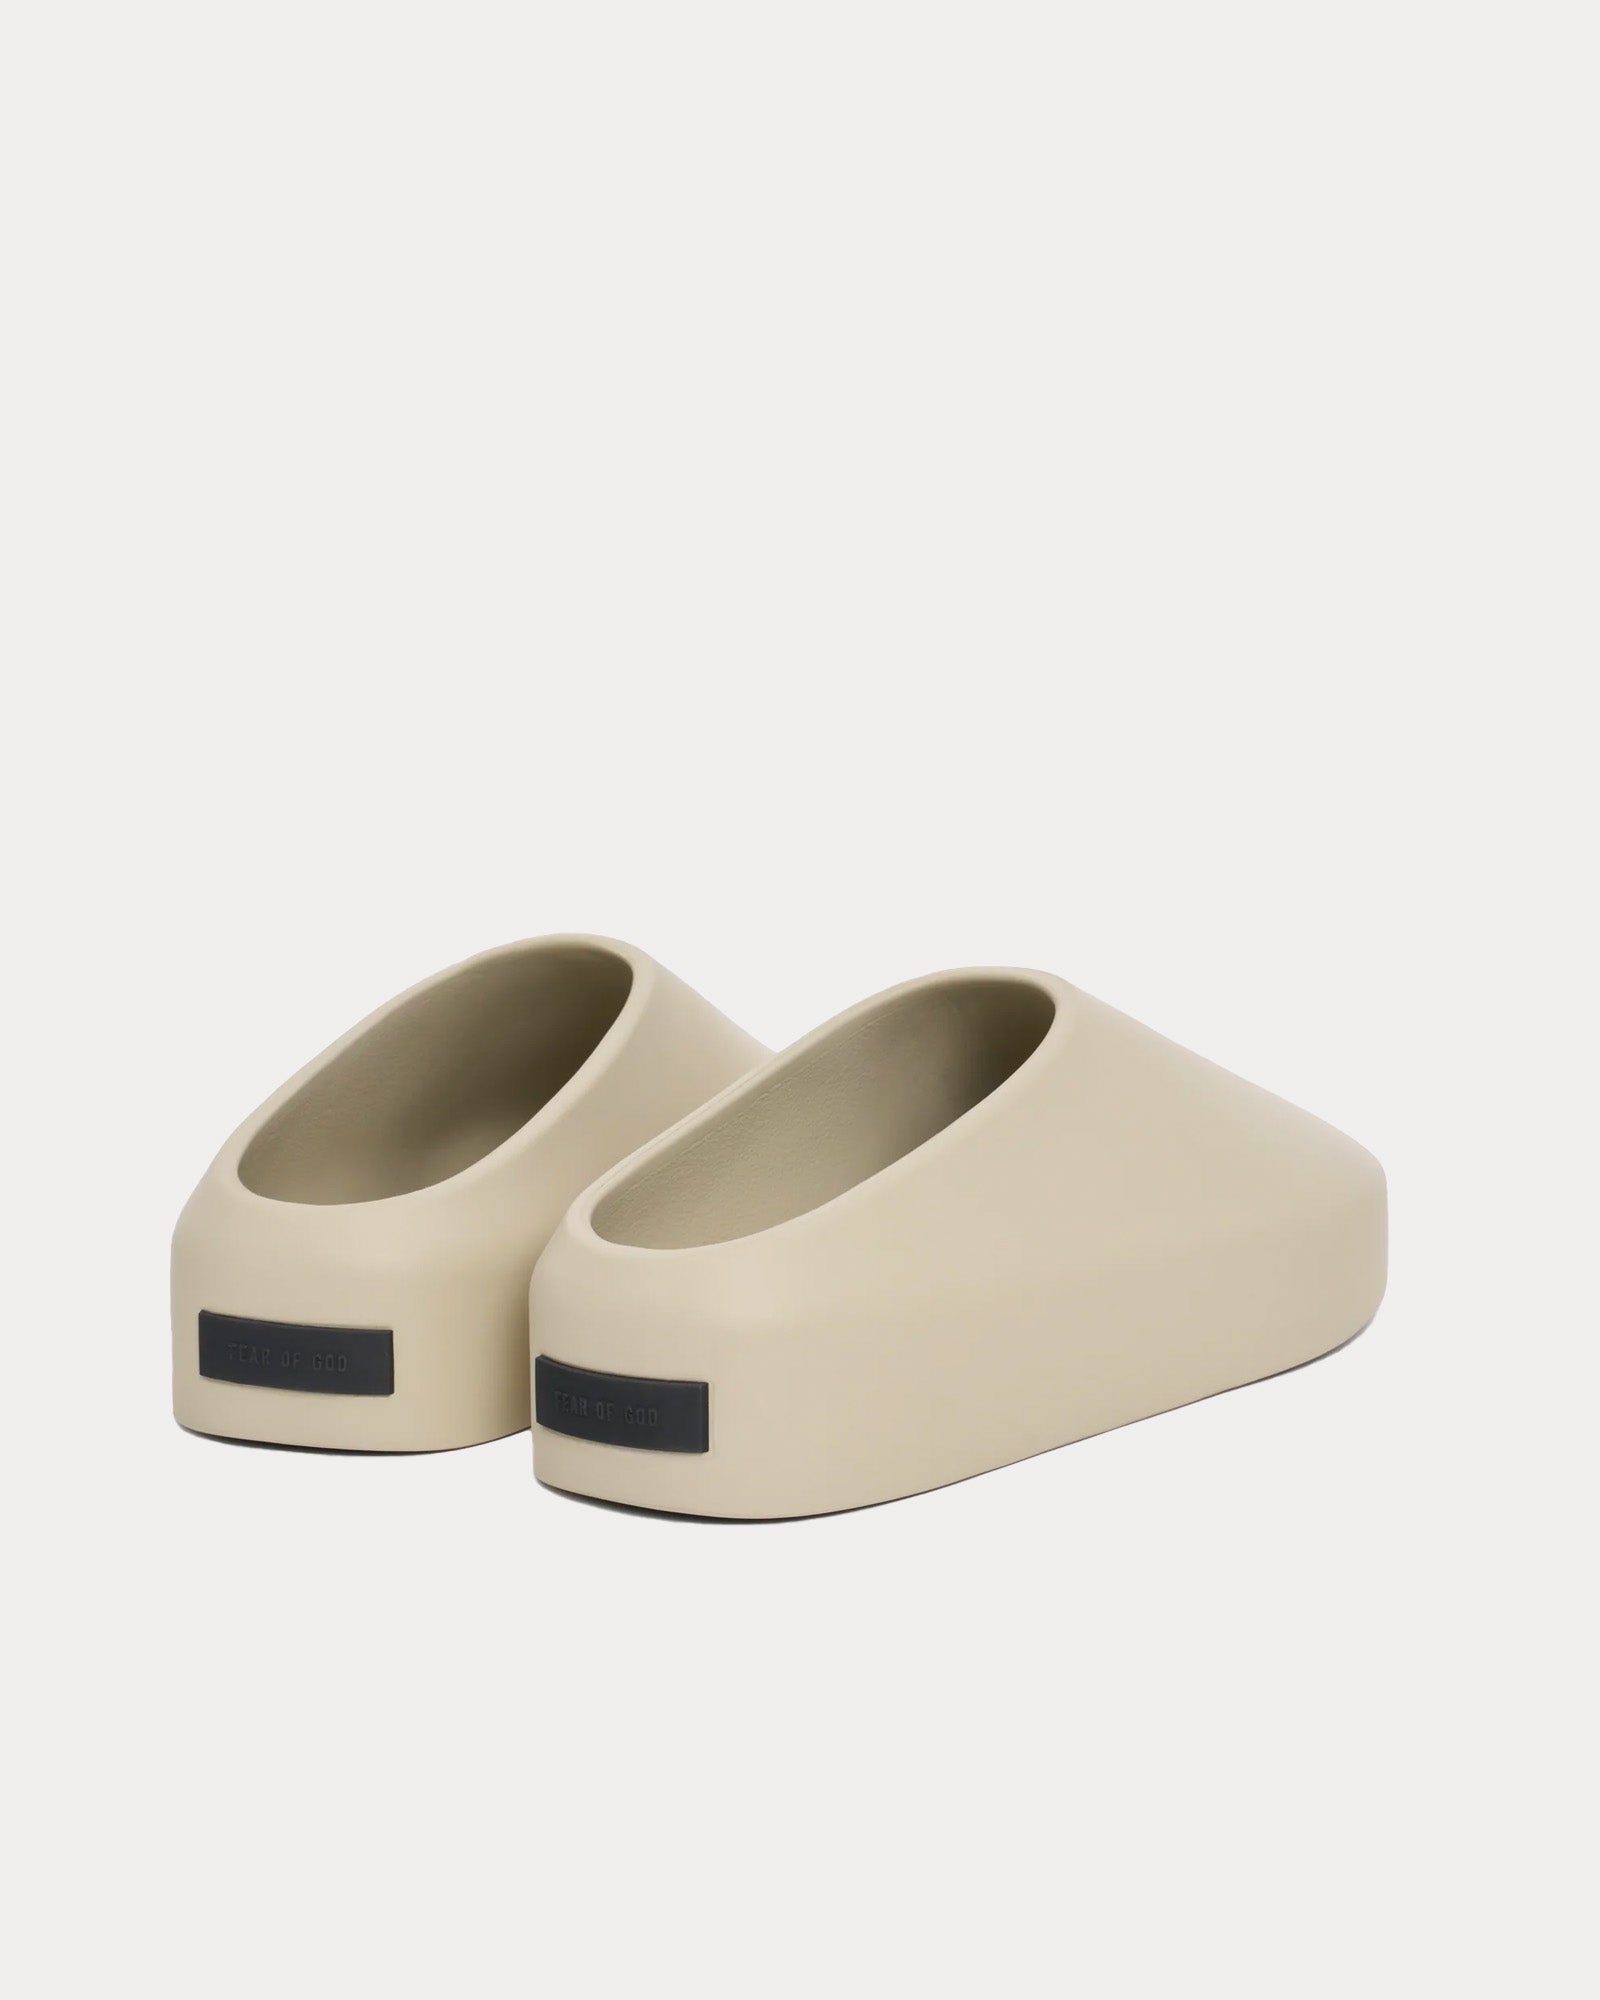 Fear of God - California Collection 8 Taupe Mules